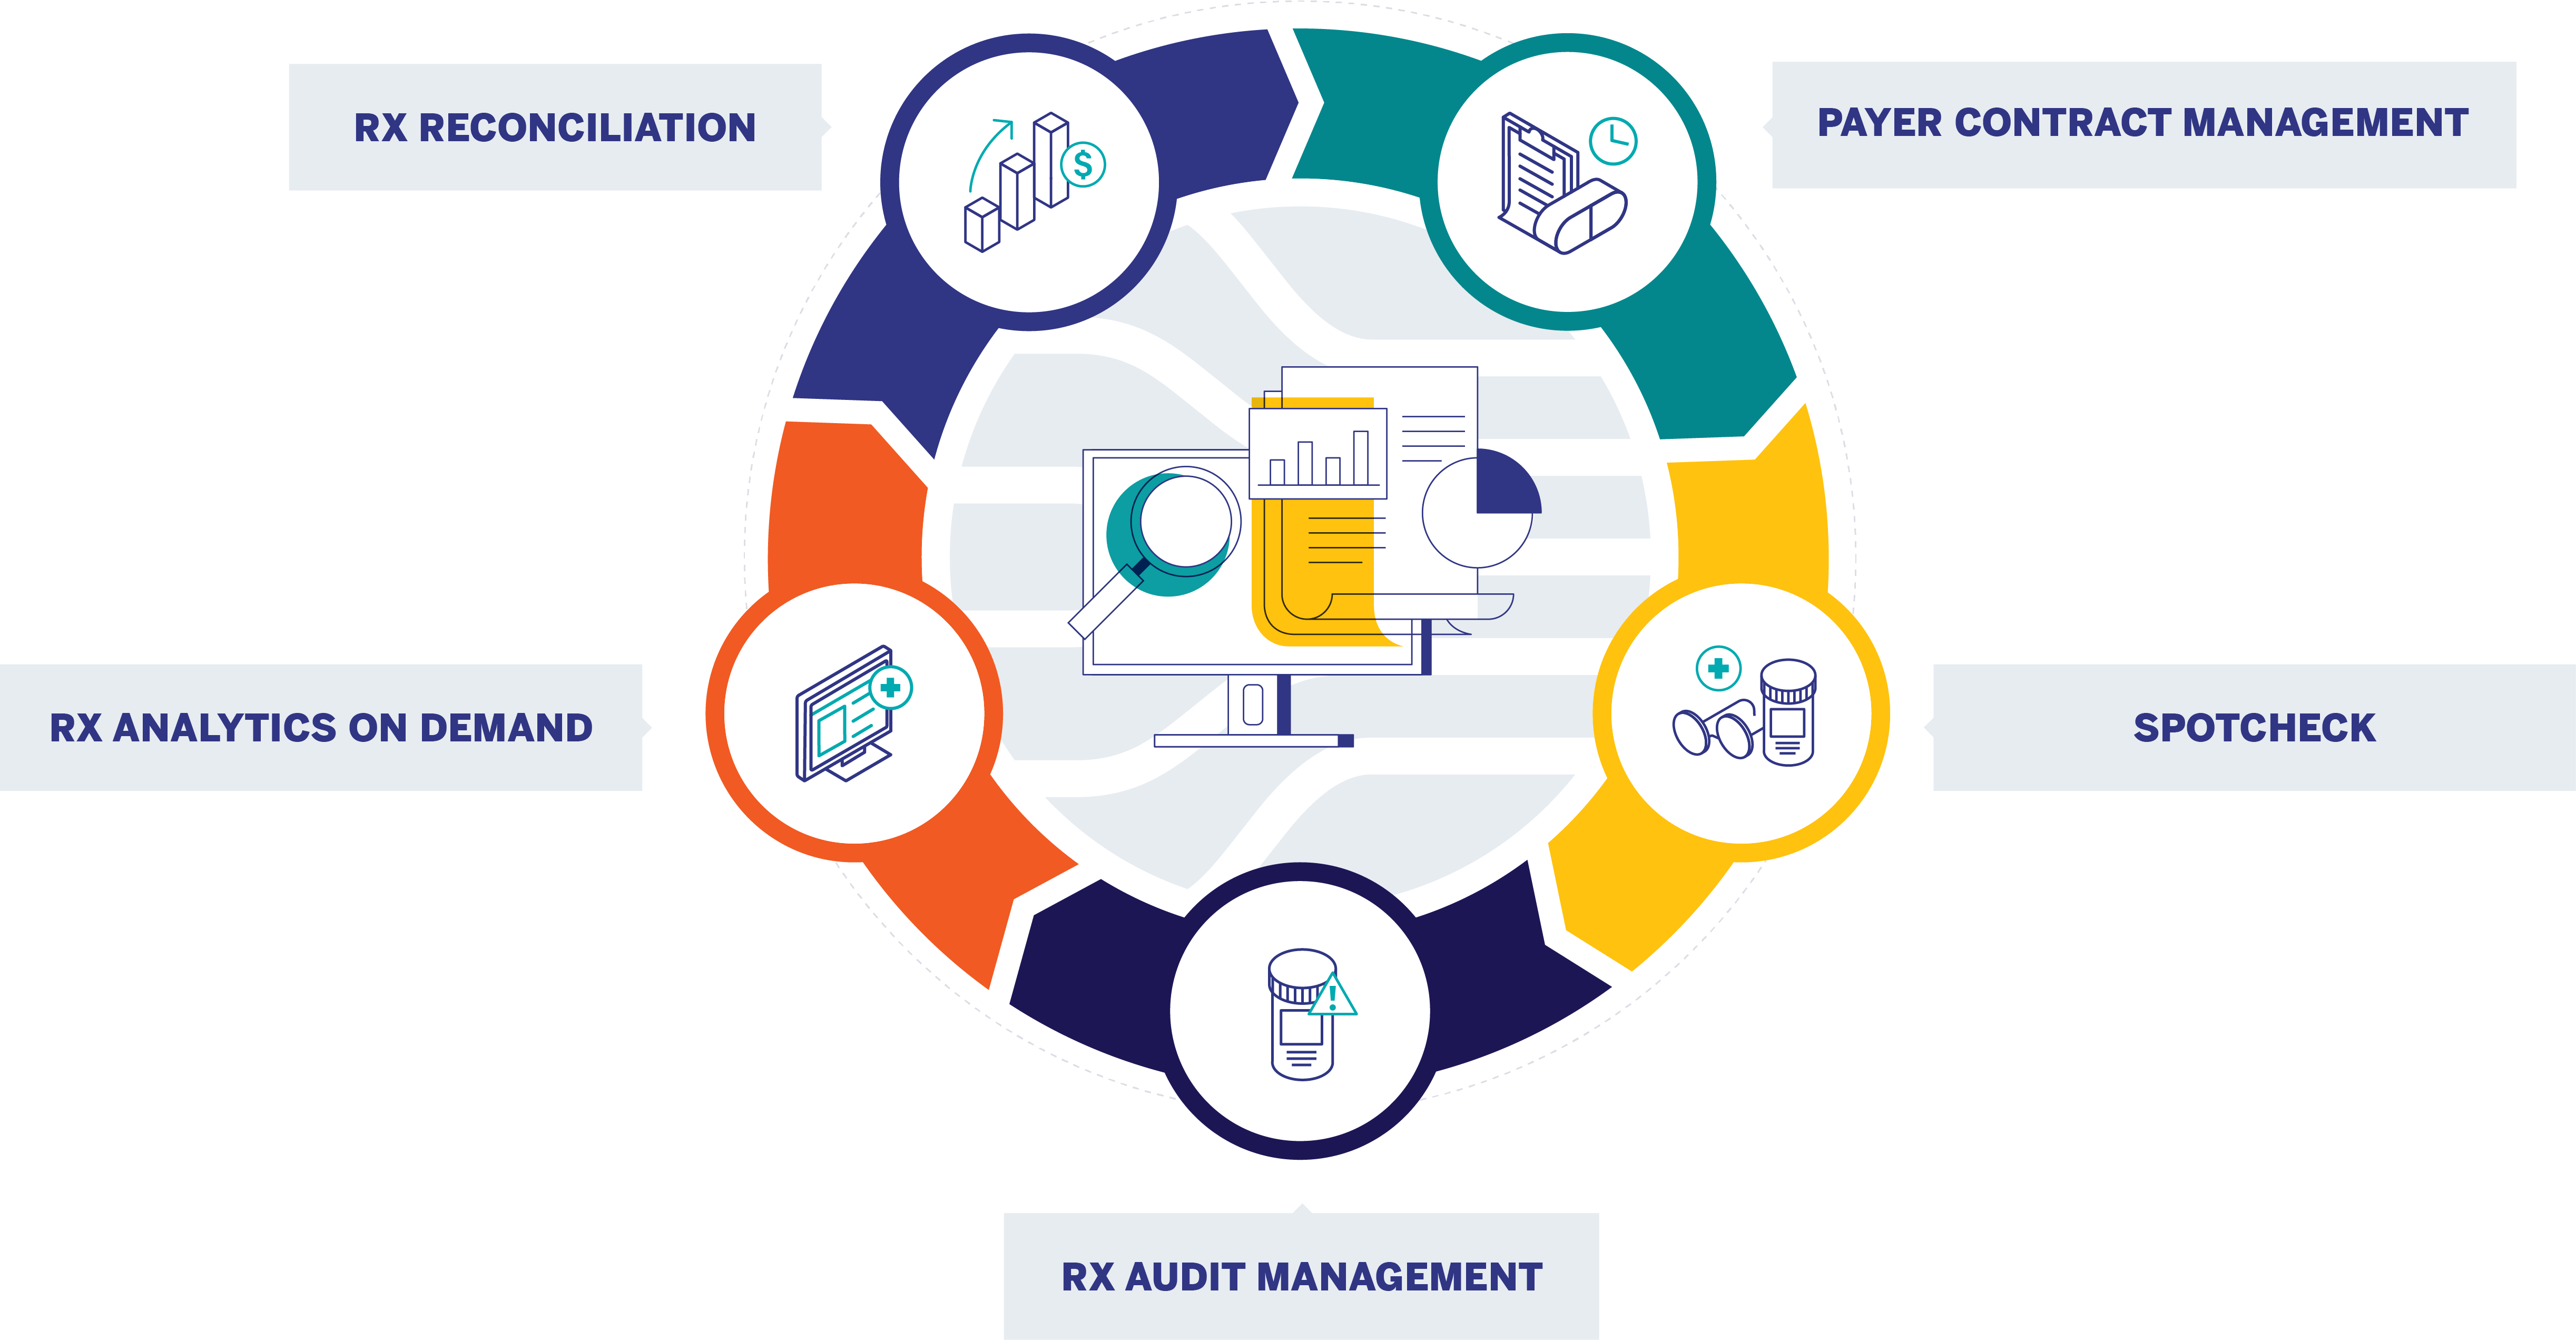 Tools inlcude Rx Reconciliation, Payer Contract Management, RX Analytics On Demand, Spotcheck, and Rx Audit Management.